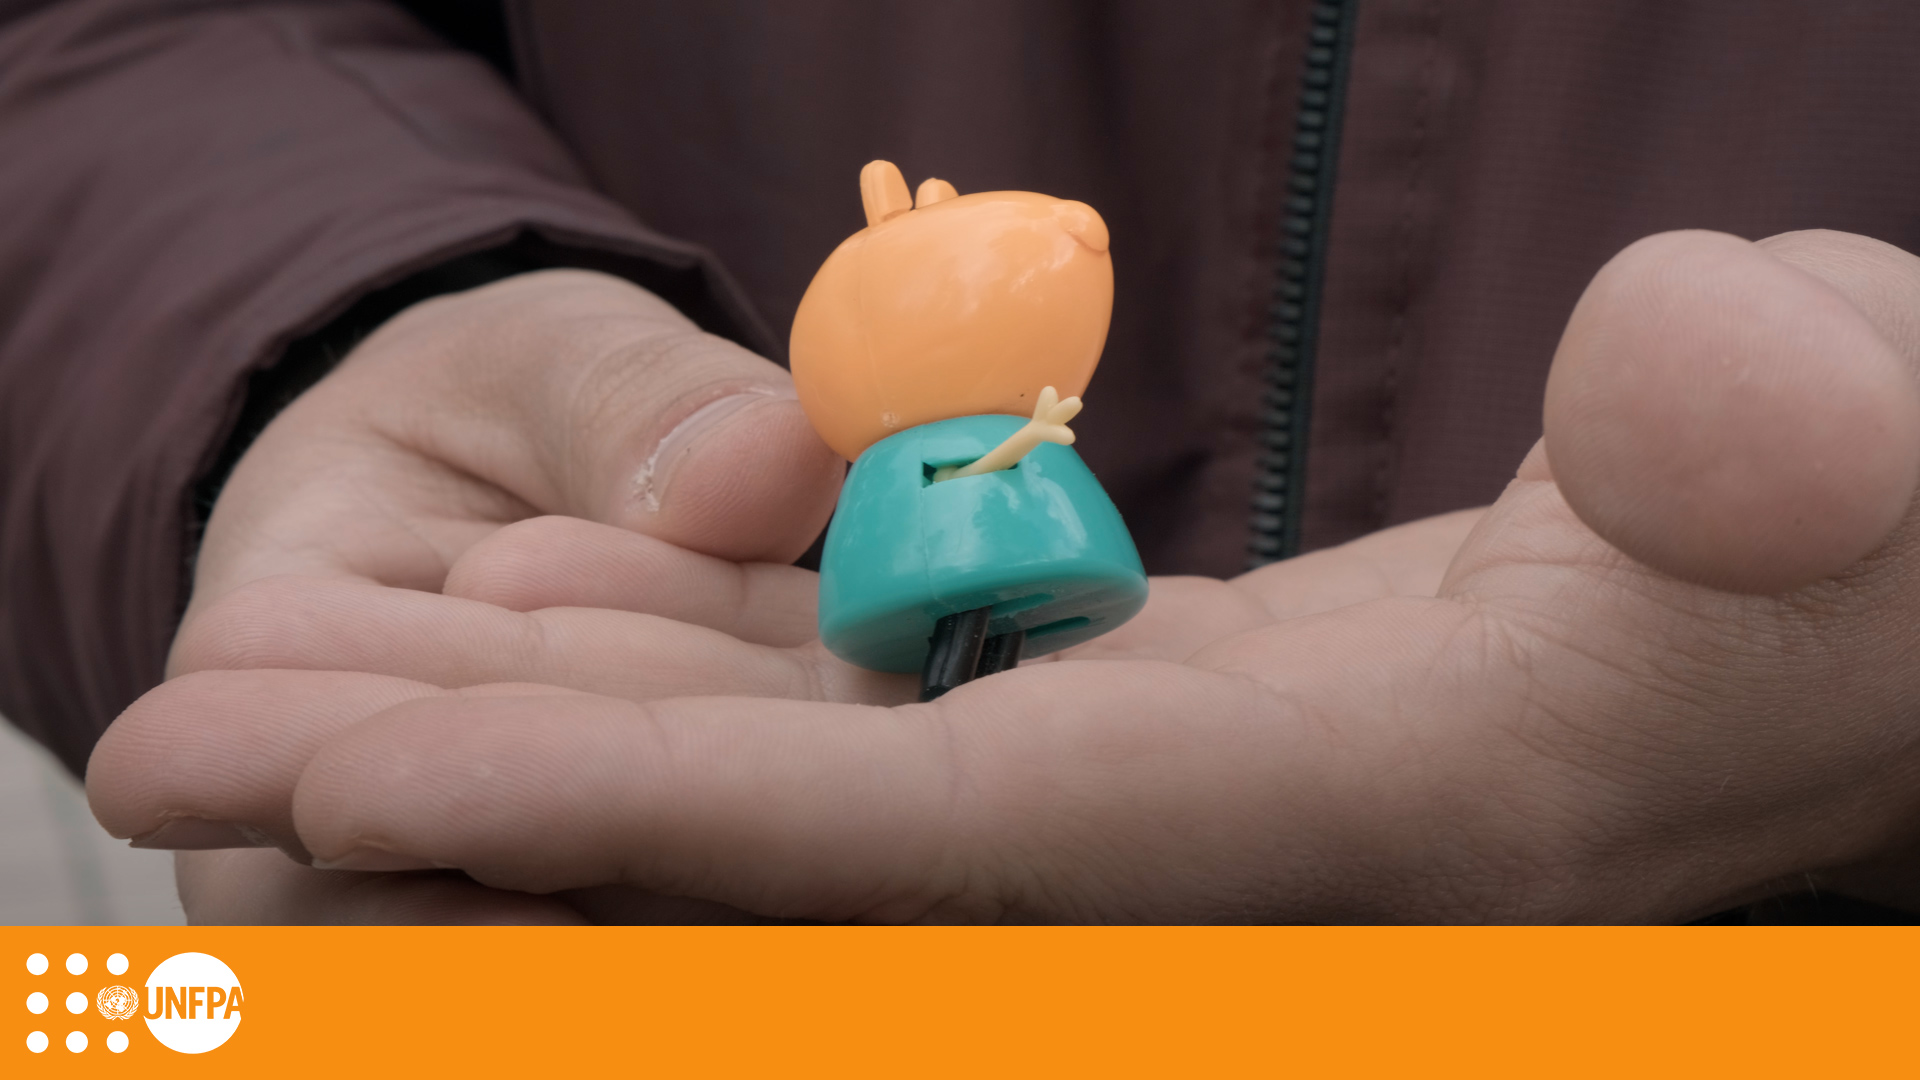 A close-up shot of a pair of hands holding an orange and teal children's toy